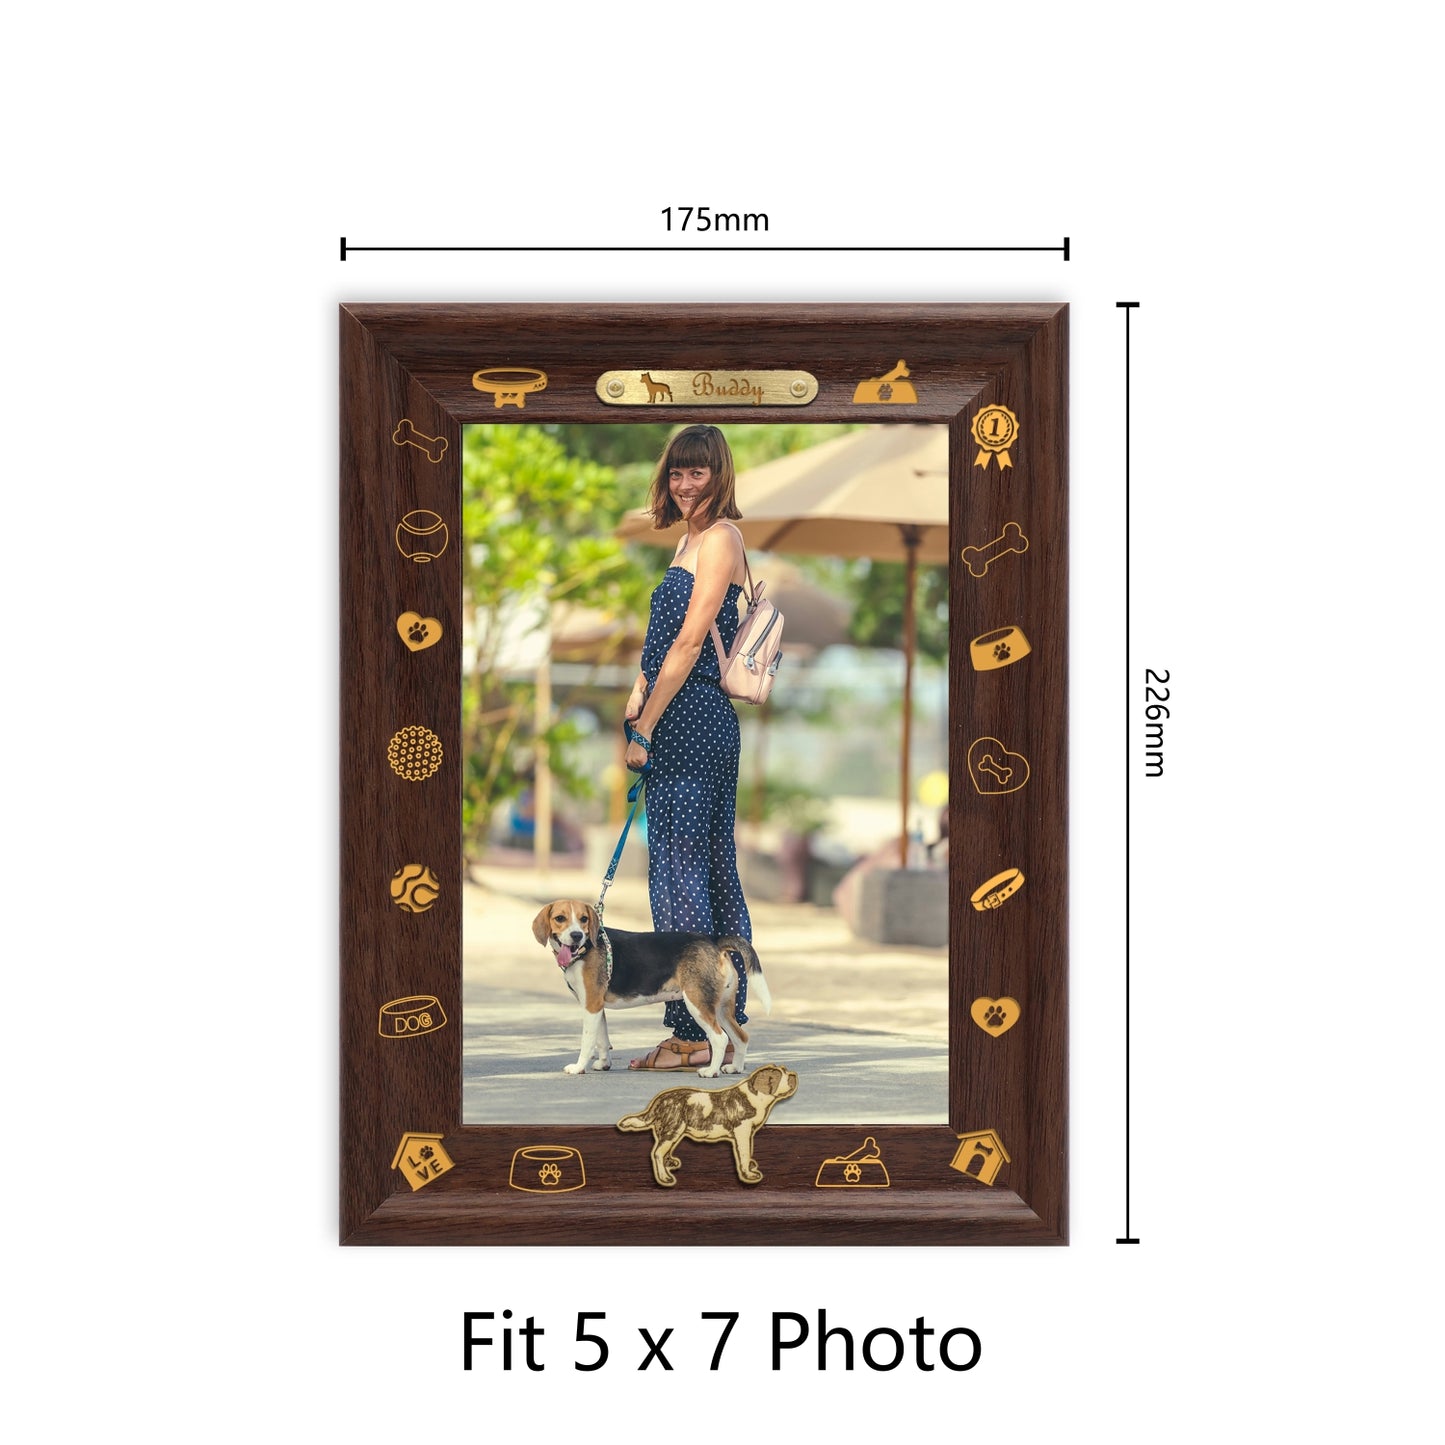 Decoration For Photo Frame Dotride Custom Picture Frame, Wood Photo Frame with Custom Wooden Carving, Can be engraved with any text you want, suitable for Suitable for Various Themes, Golden Retriever